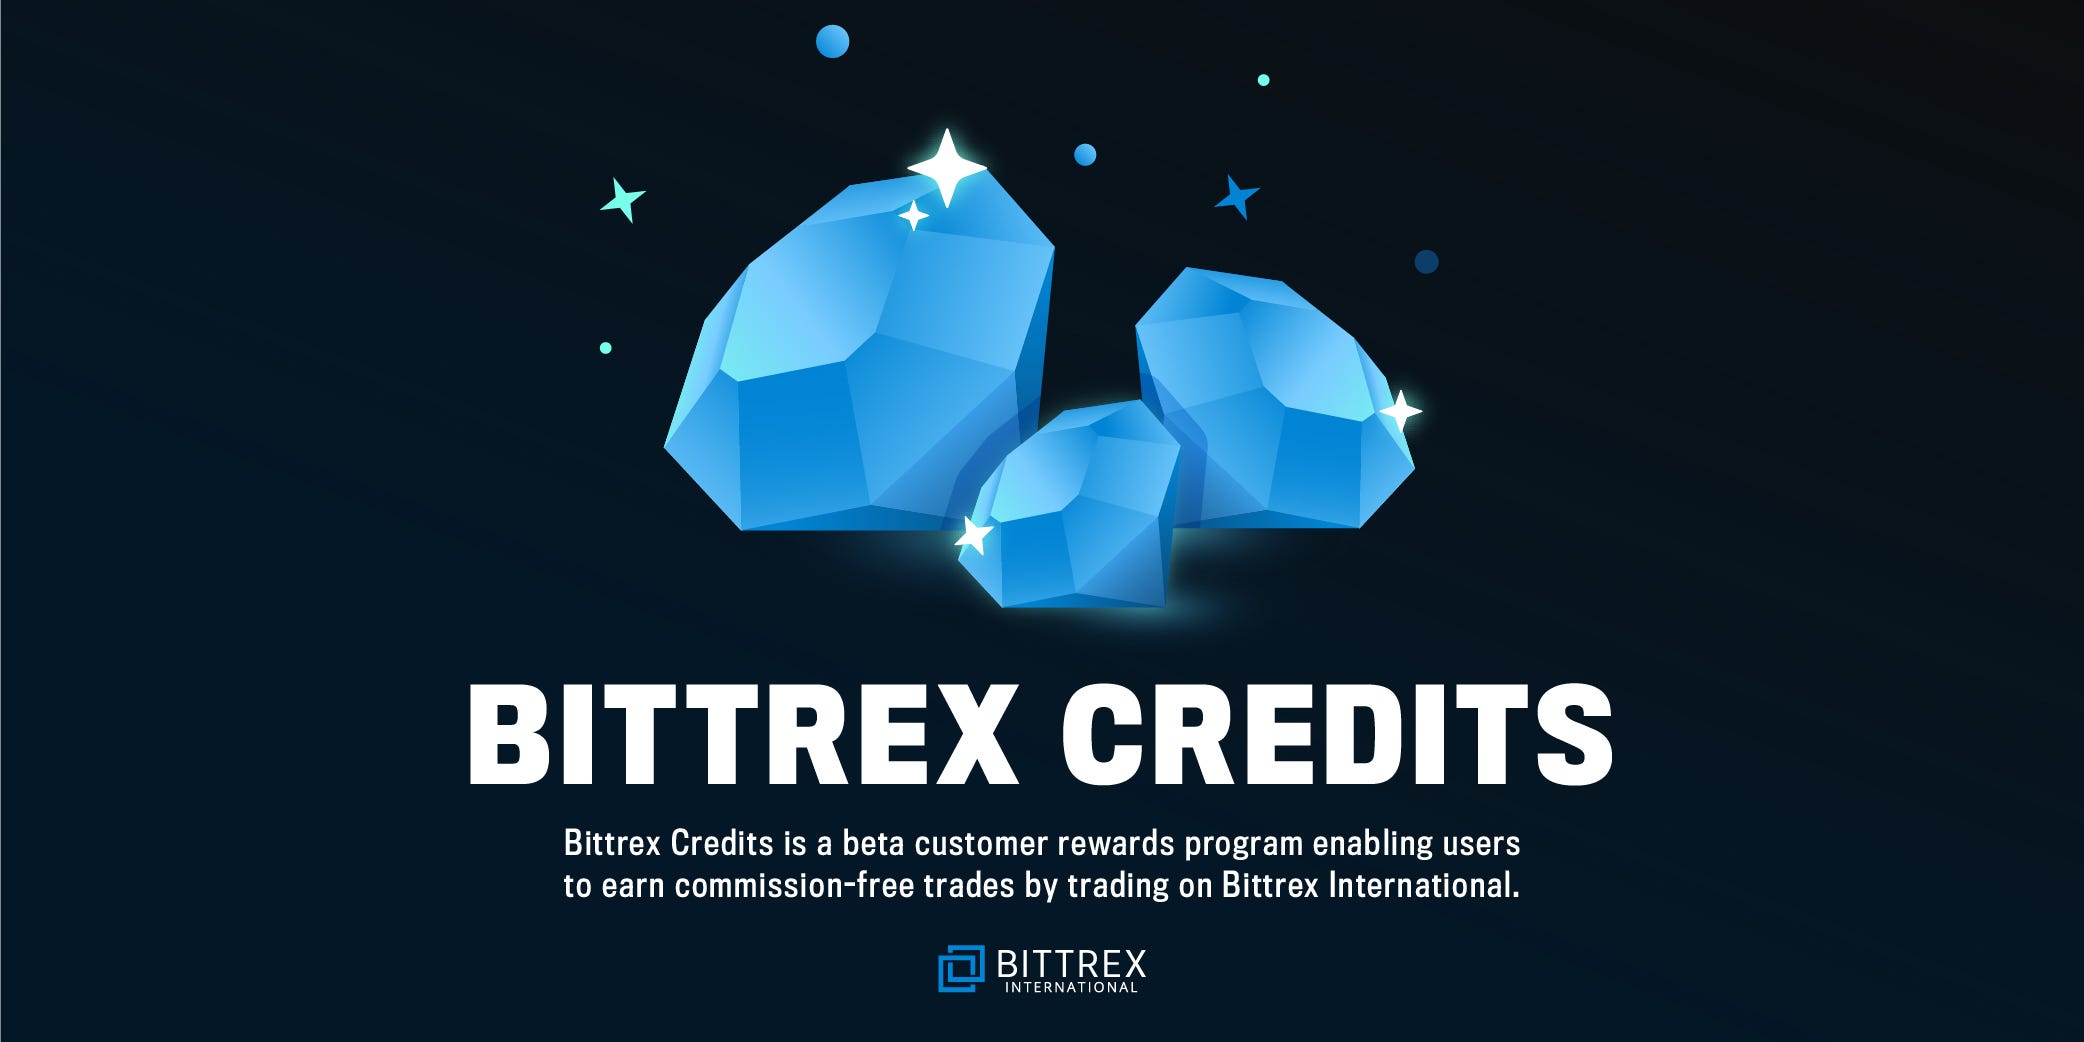 Show Me the Credits! We’re giving away over 25 million Bittrex Credits